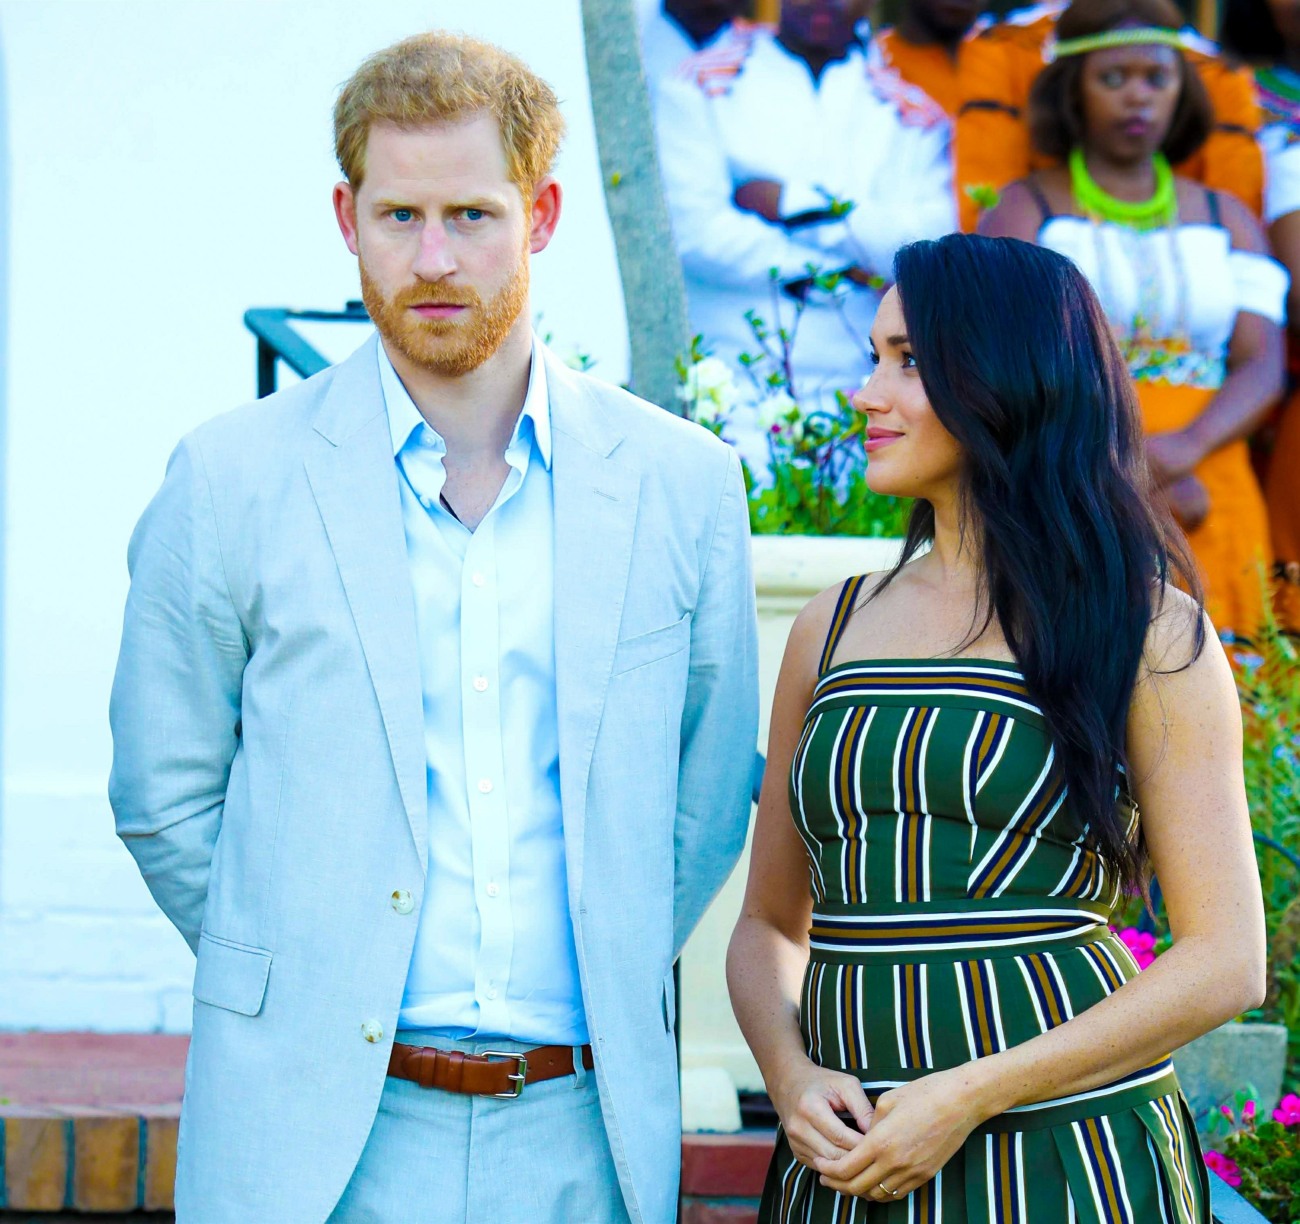 Prince Harry and Meghan Duchess of Sussex visit to Africa